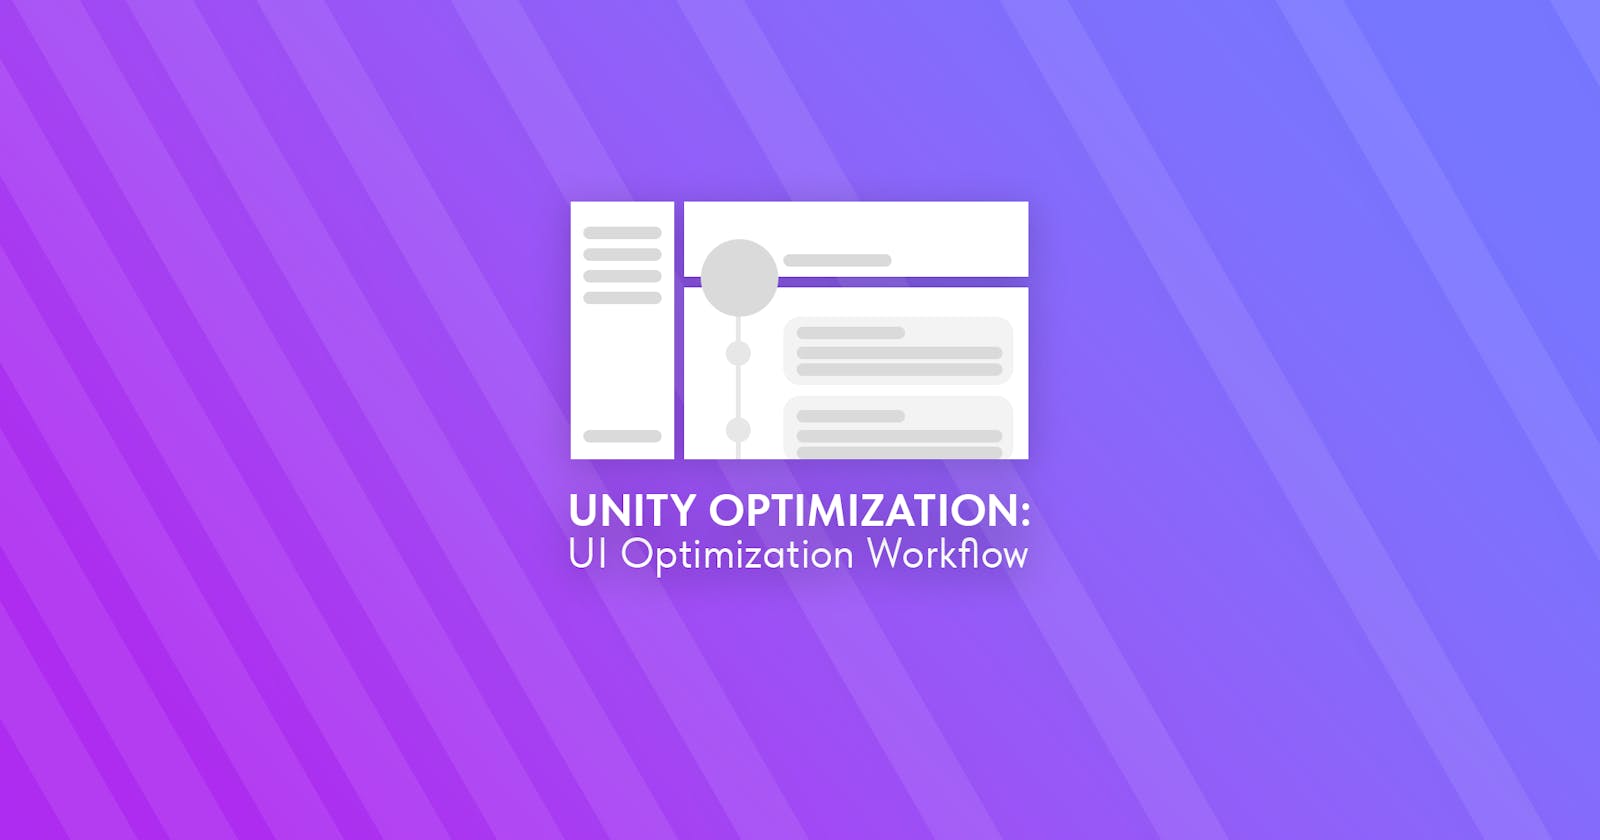 Unity UI Optimization Workflow: Step-by-Step full guide for everyone